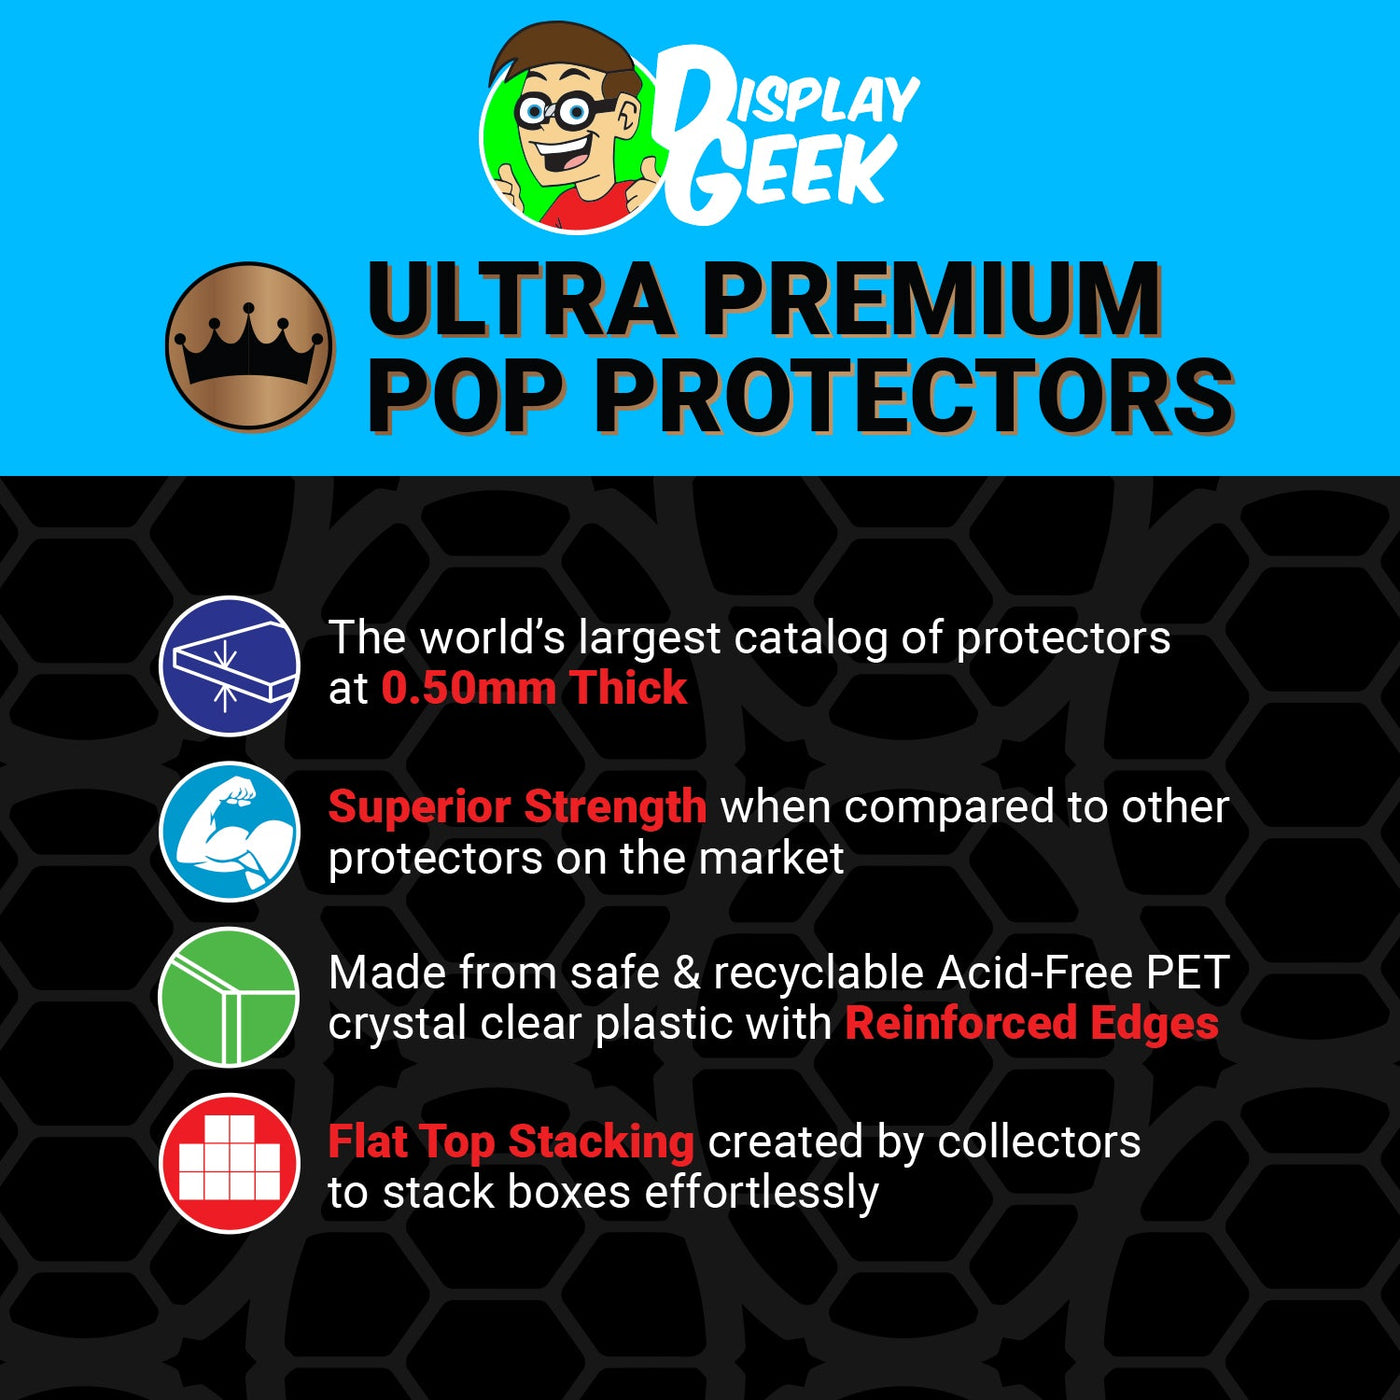 Pop Protector for Freddy Funko Walking Fred SDCC LE 96 on The Protector Guide App by Display Geek